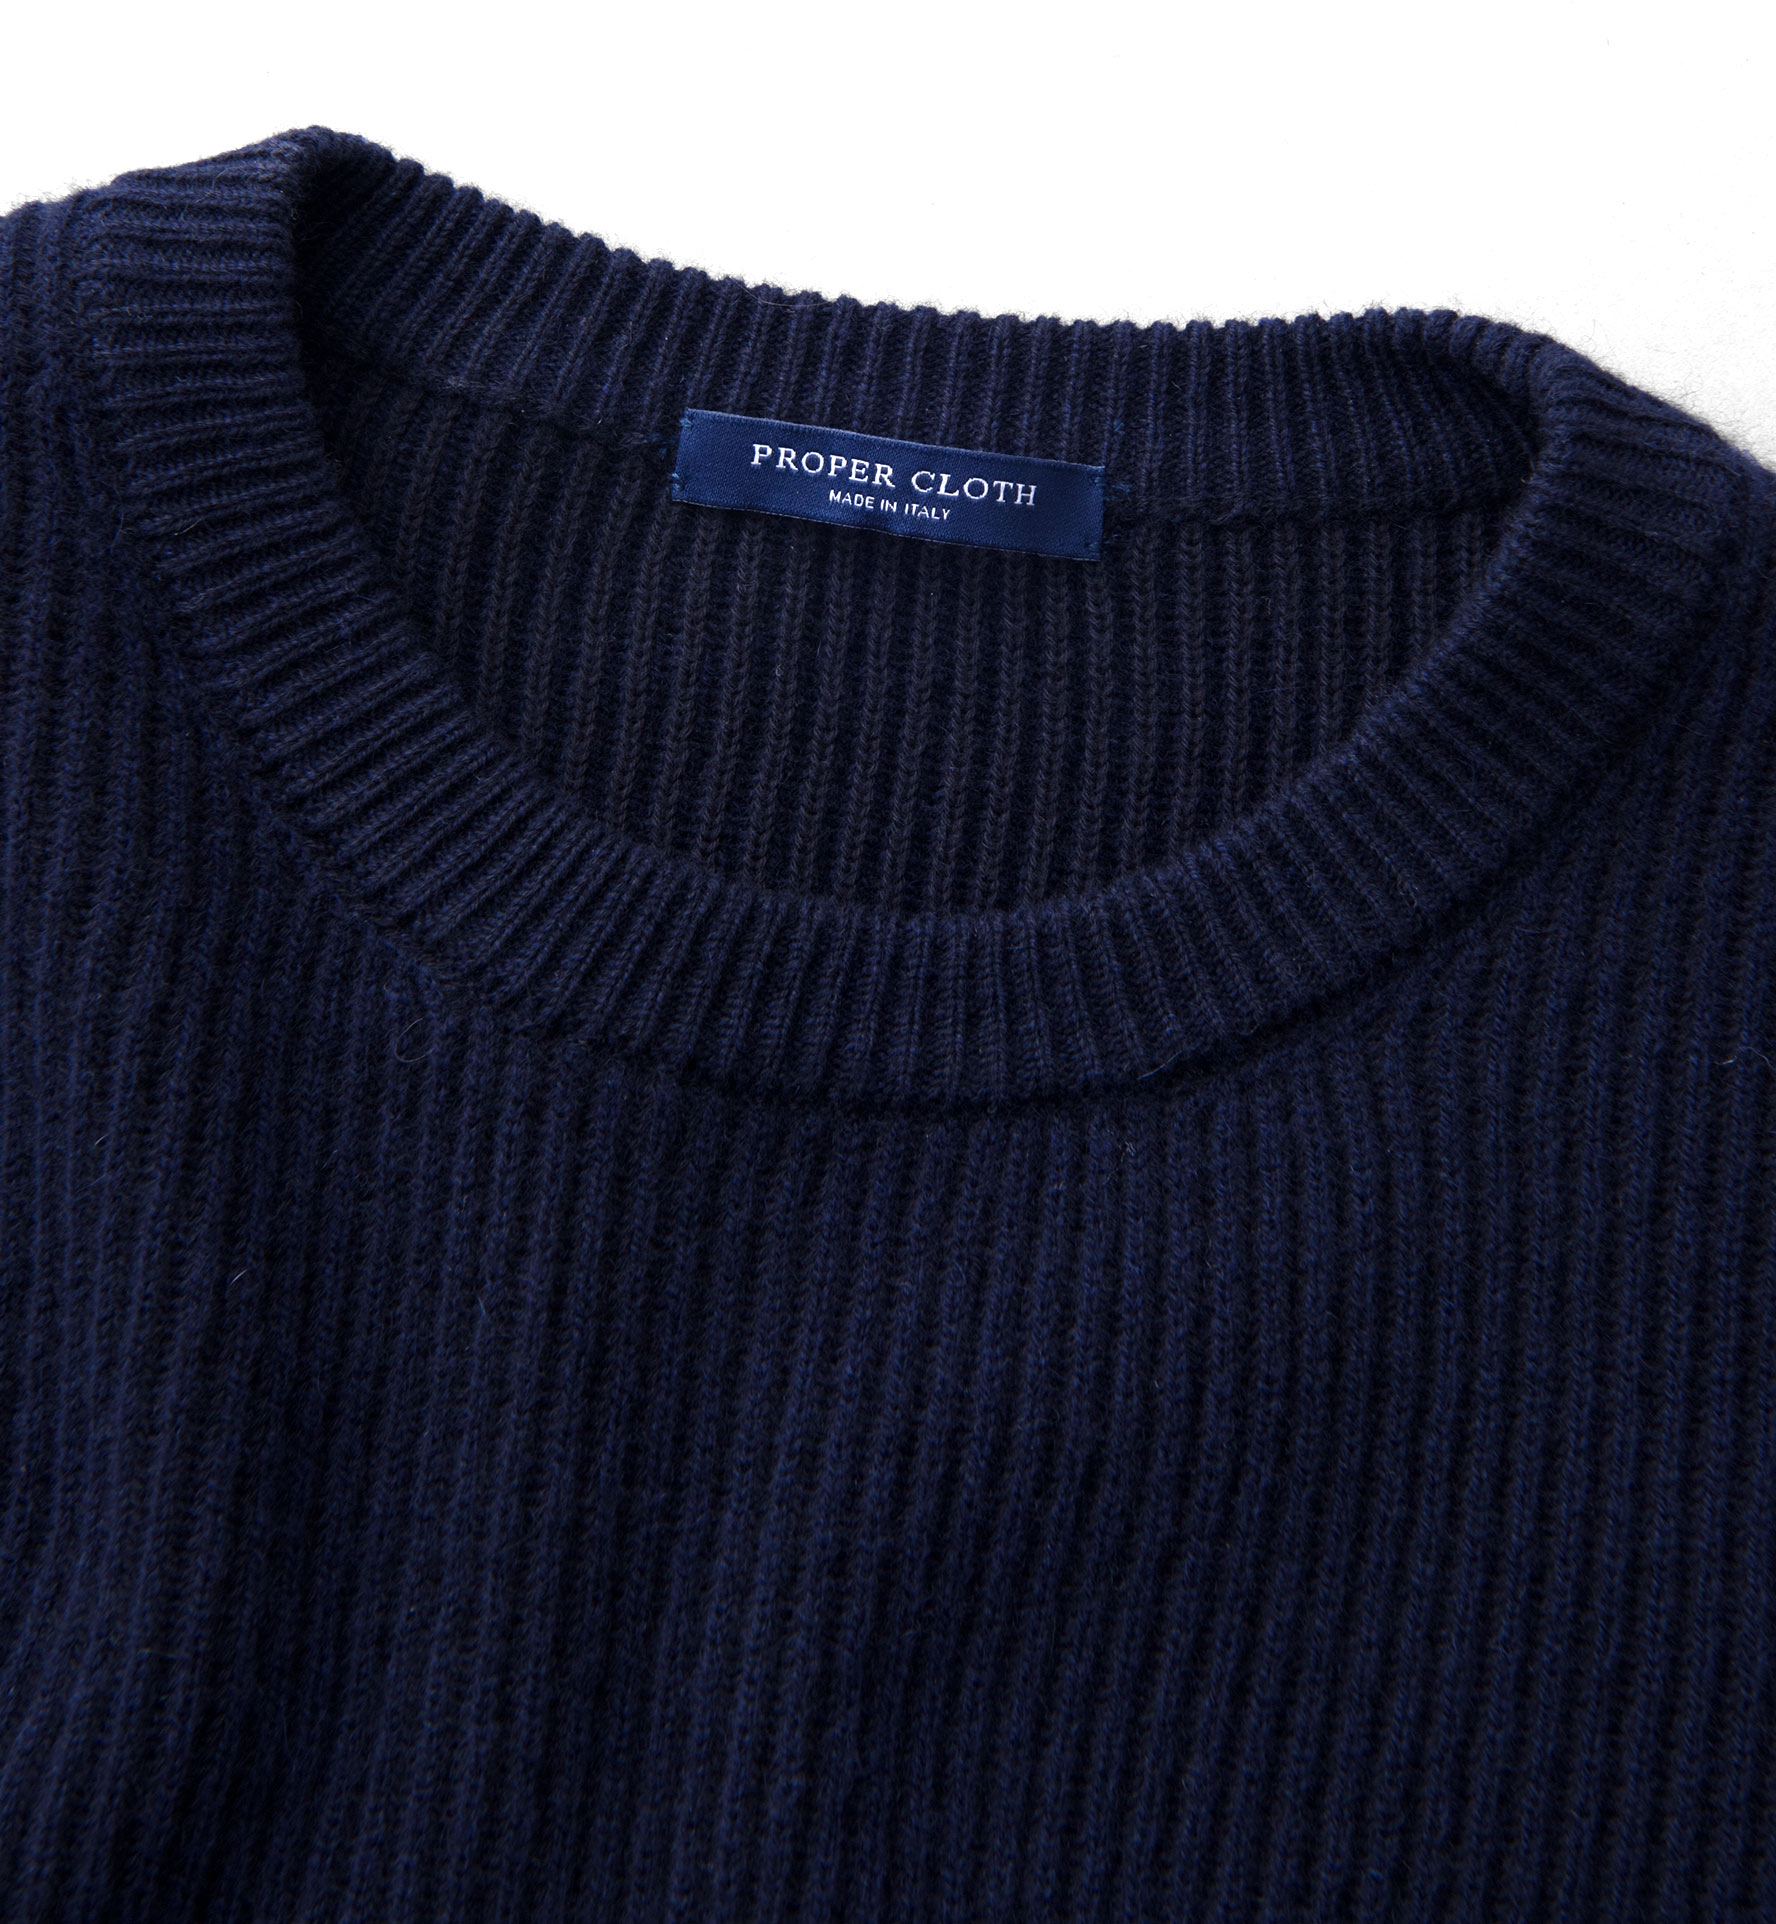 Navy Ribbed Cotton and Cashmere Crewneck Sweater by Proper Cloth